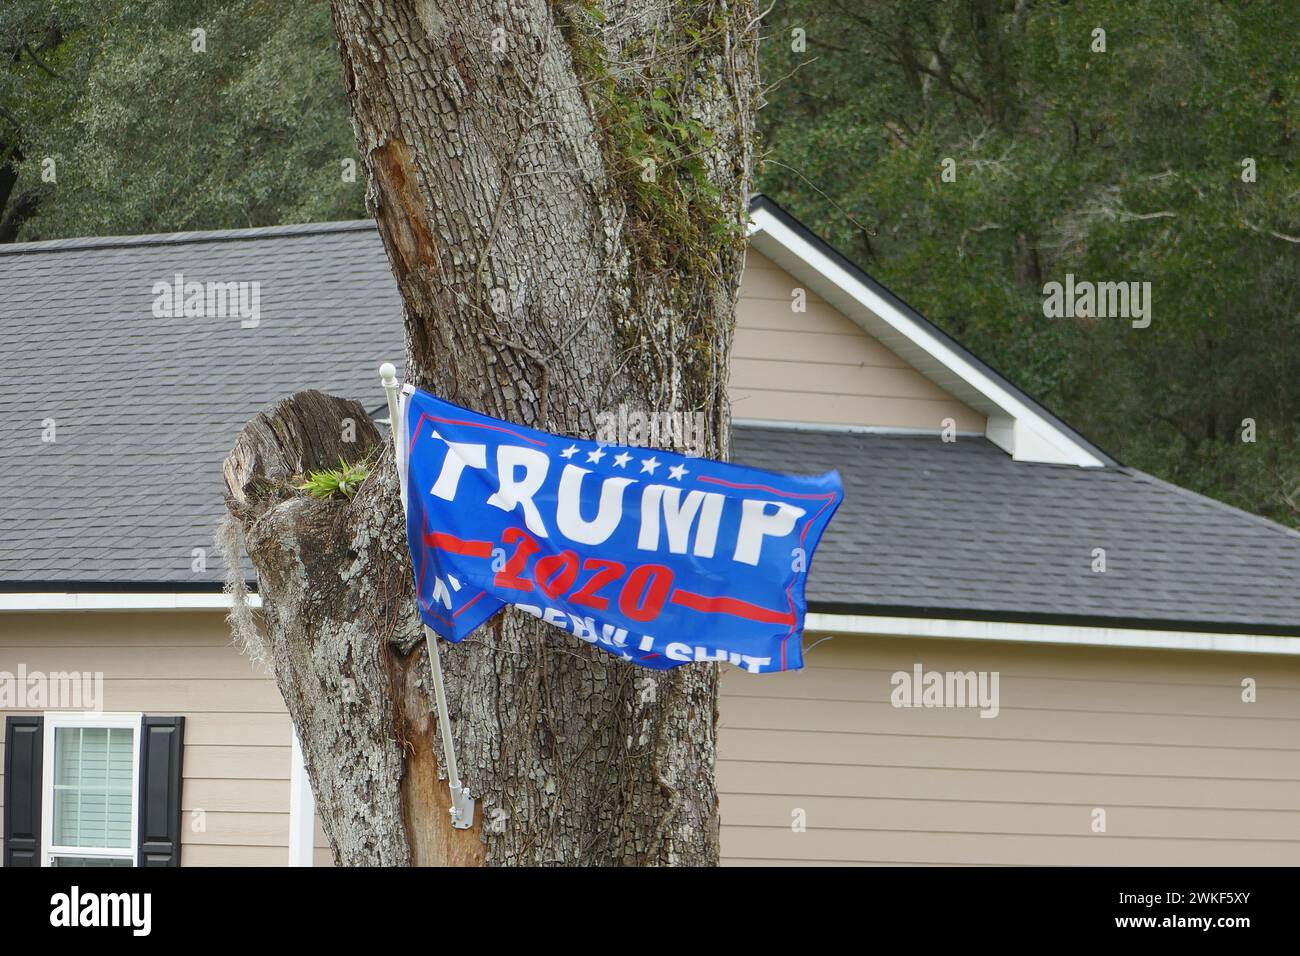 Local resident in North Florida is flying a Donald Trump campaign flag from 2020....Again. Stock Photo